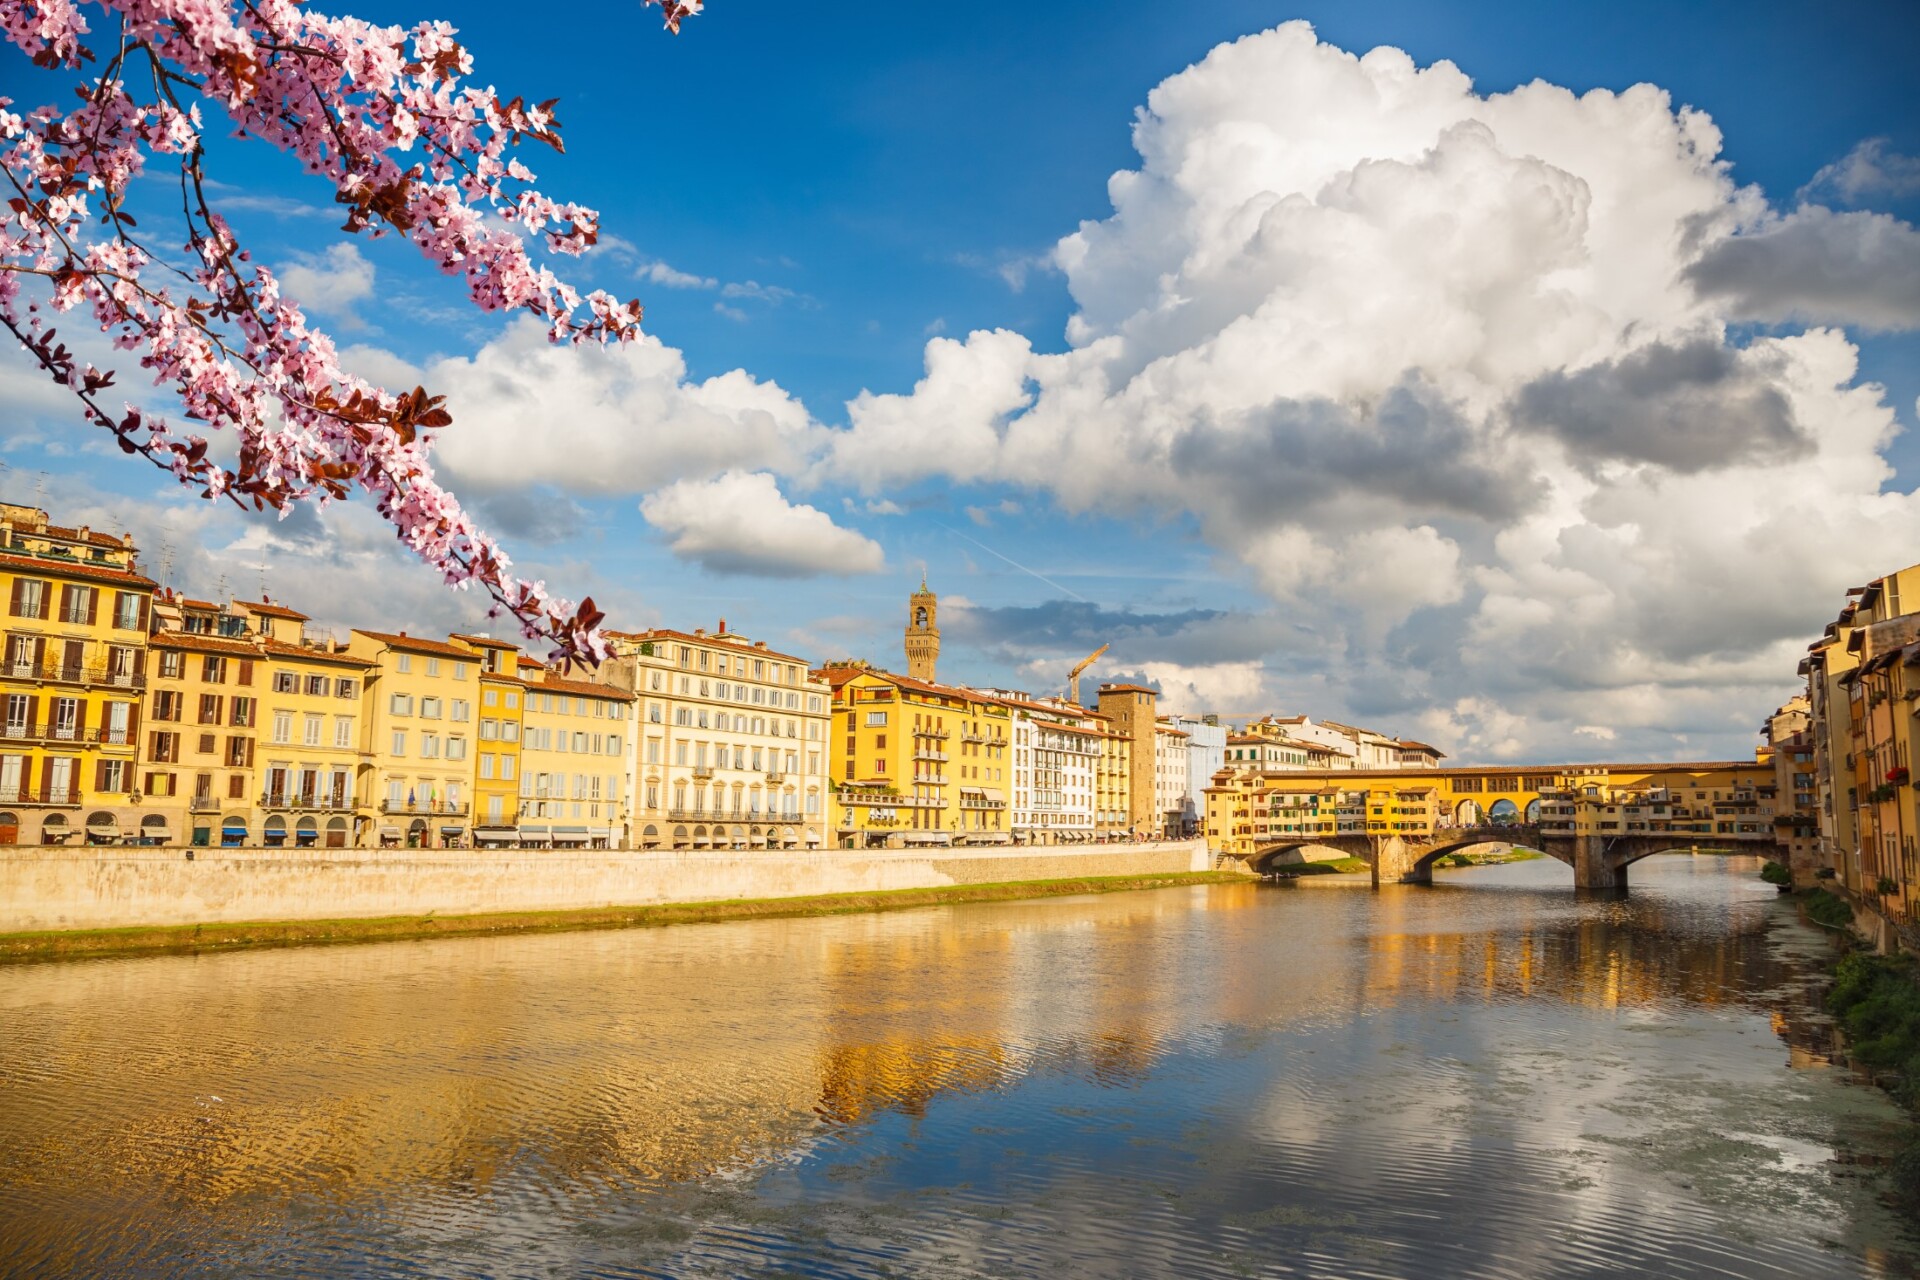 Wiosna w Toskanii, Arno river in Florence at spring, Italy